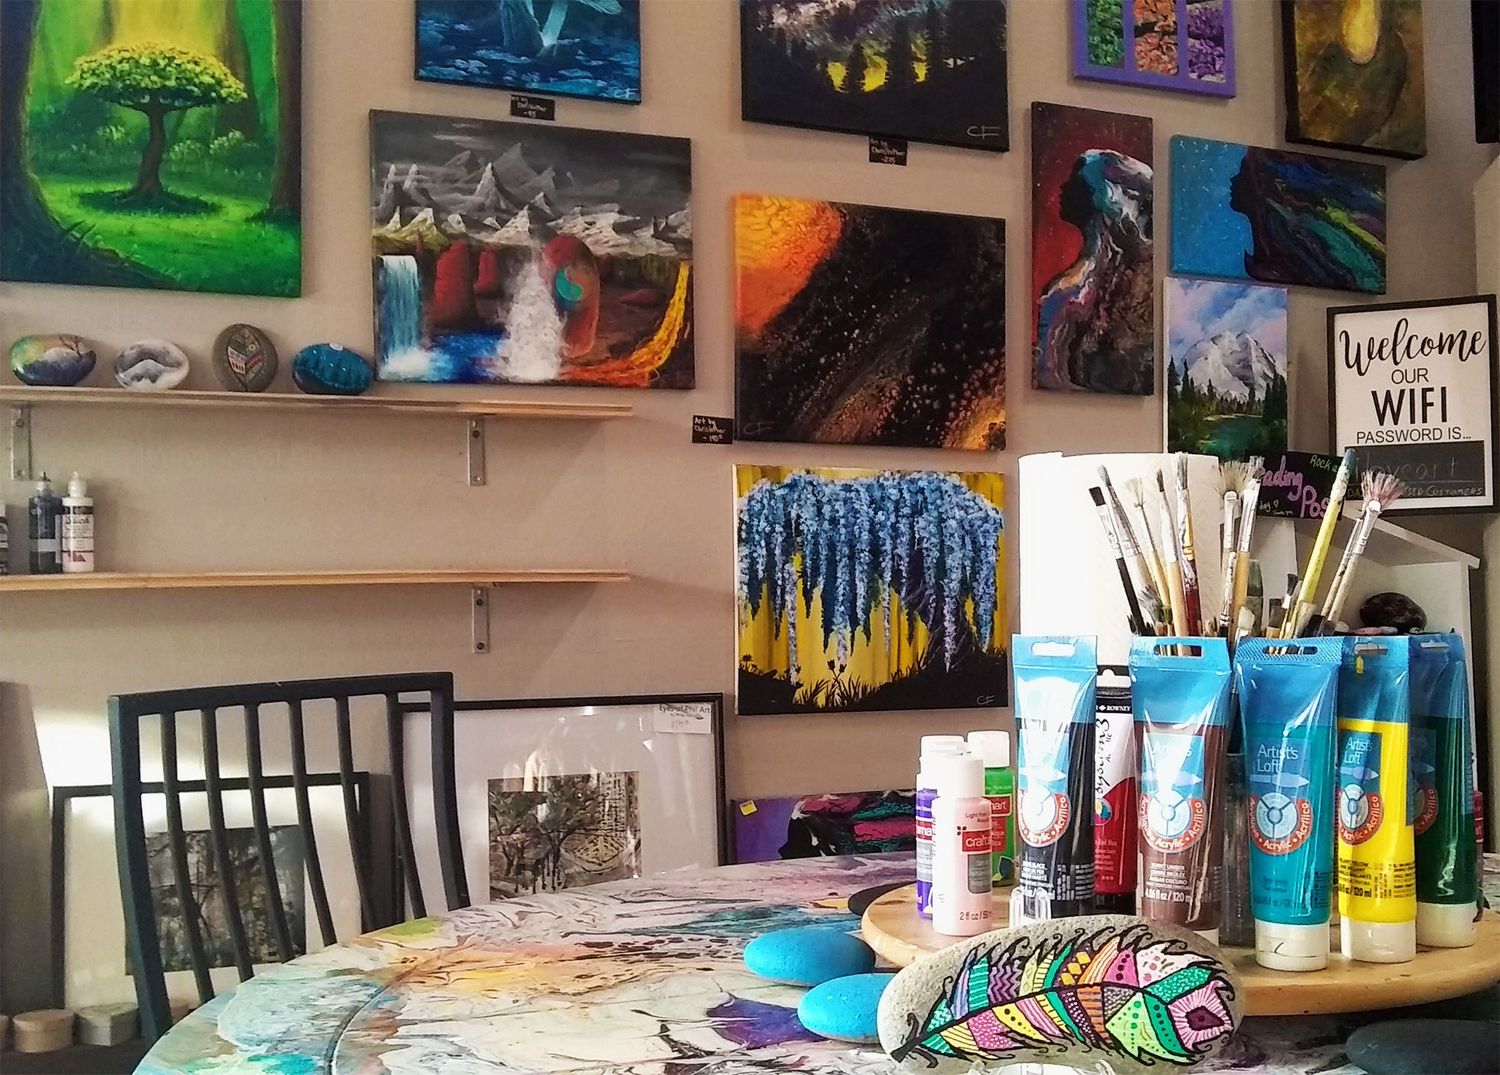 Gallery Photo of Inspiring, creative therapy space